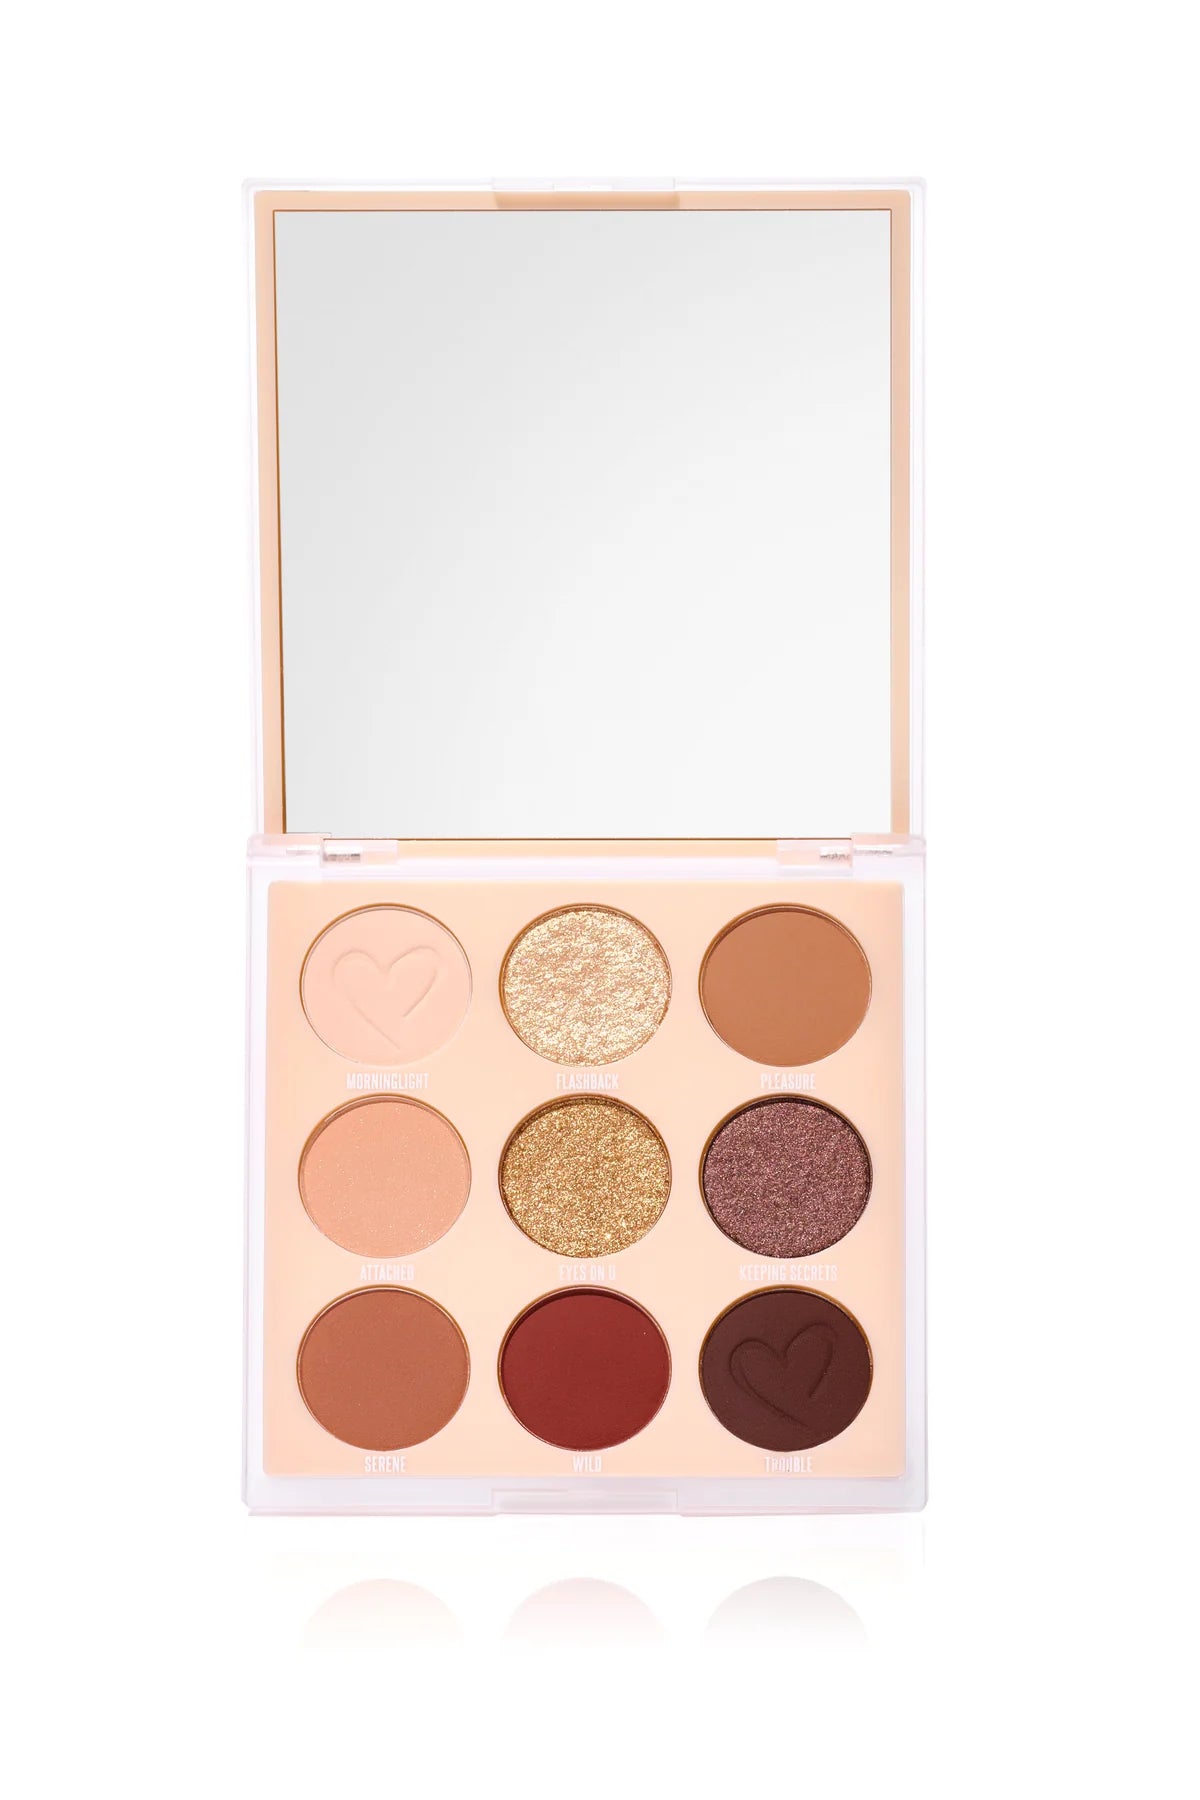 NUDE DESIRE SHADOW PALETTE BY BEAUTY CREATIONS